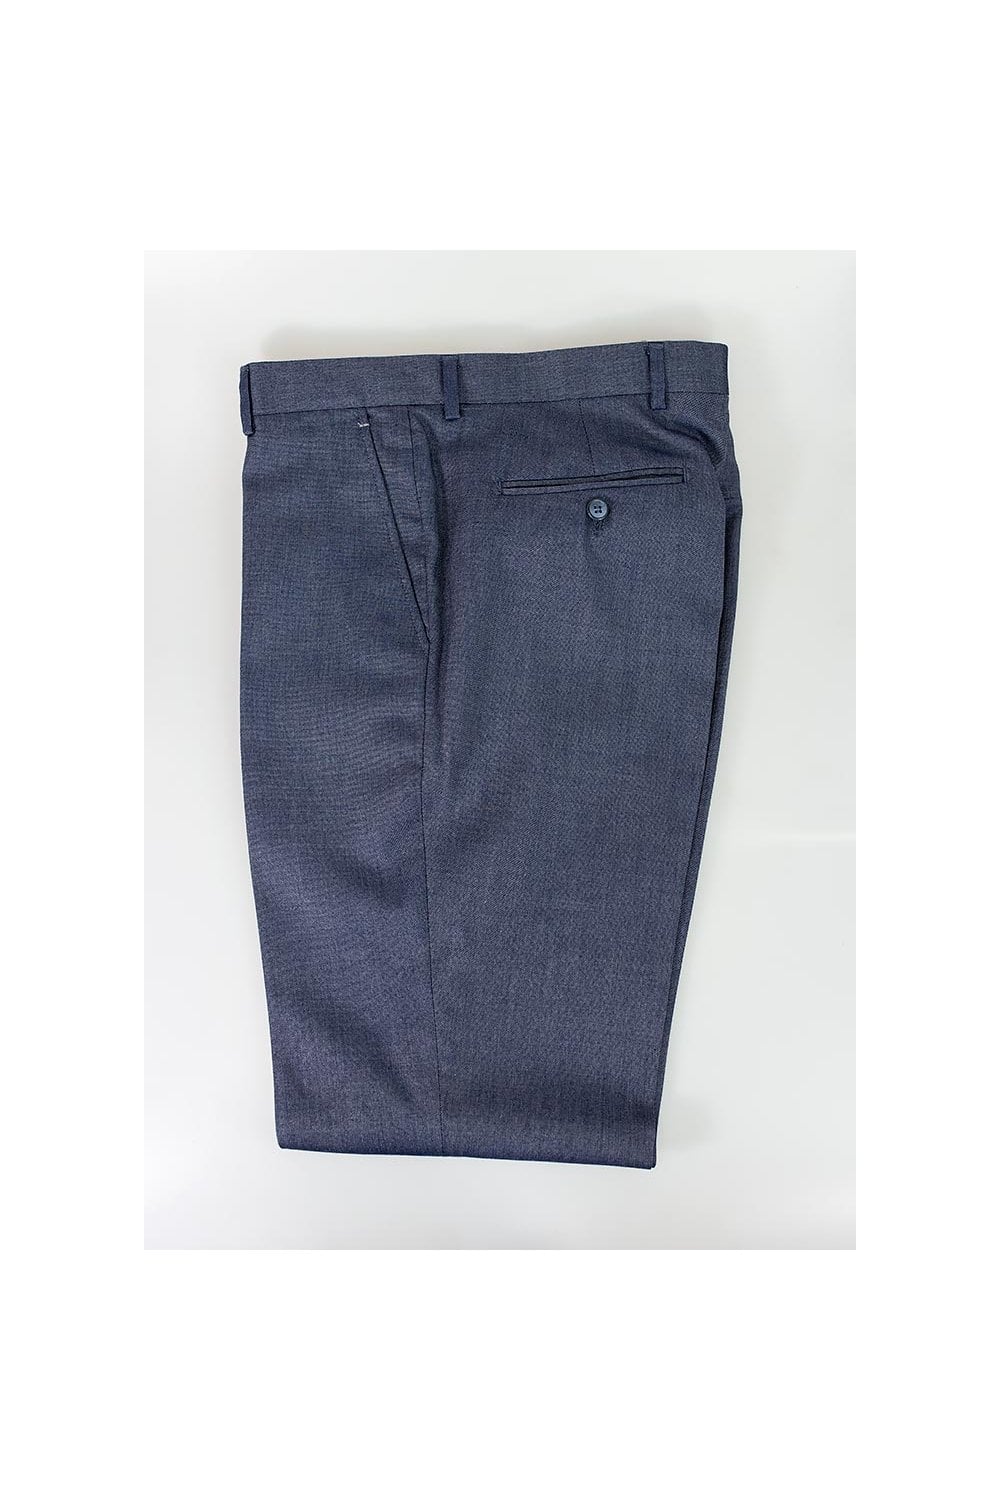 Steel Blue Trousers - STOCK CLEARANCE - Trousers - 38R - THREADPEPPER